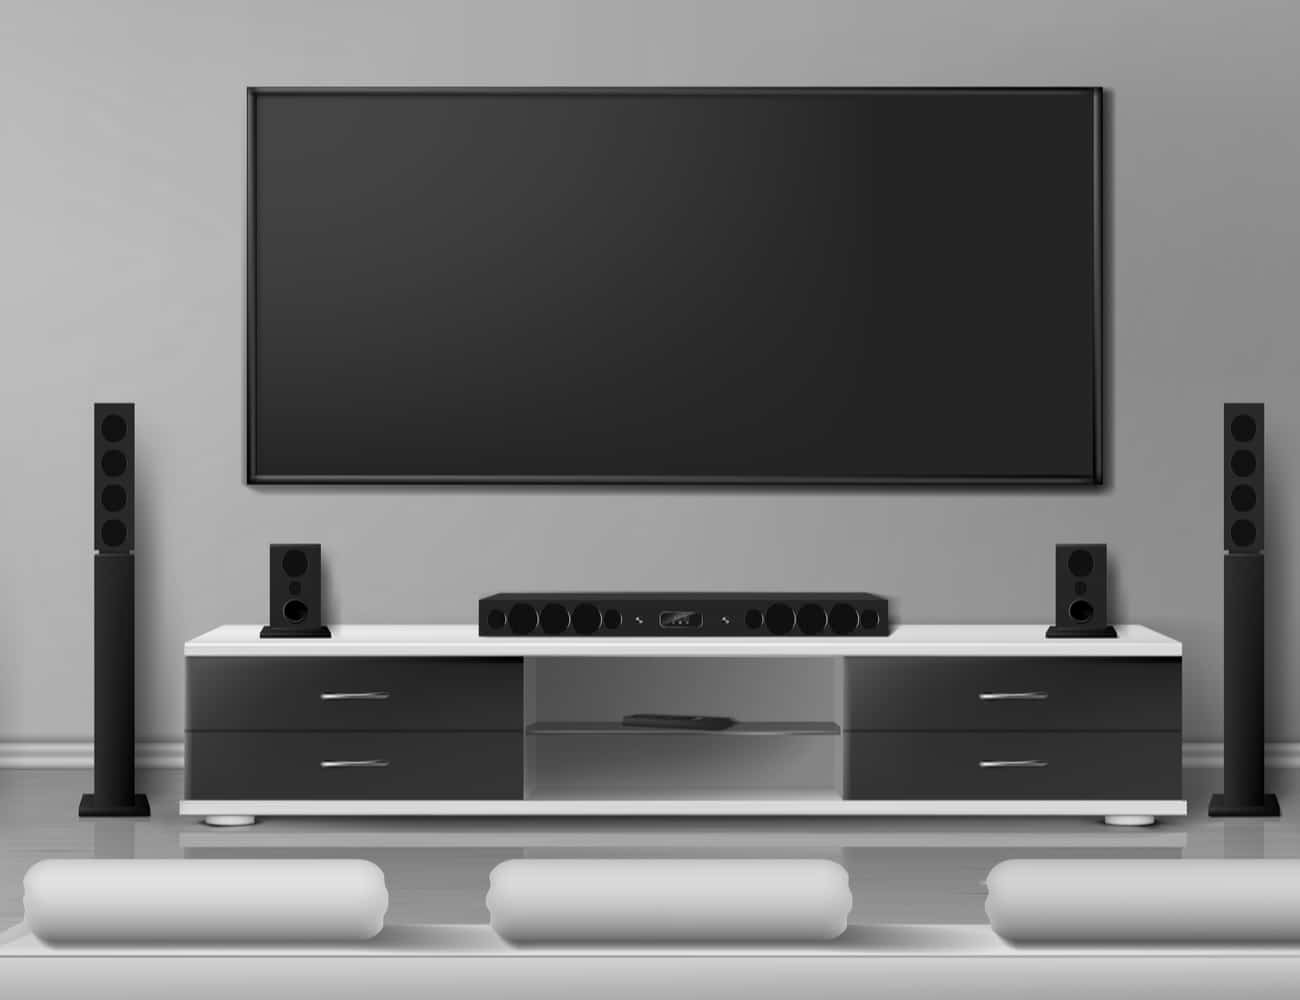 A Tv and Home Theatre Set in a Room